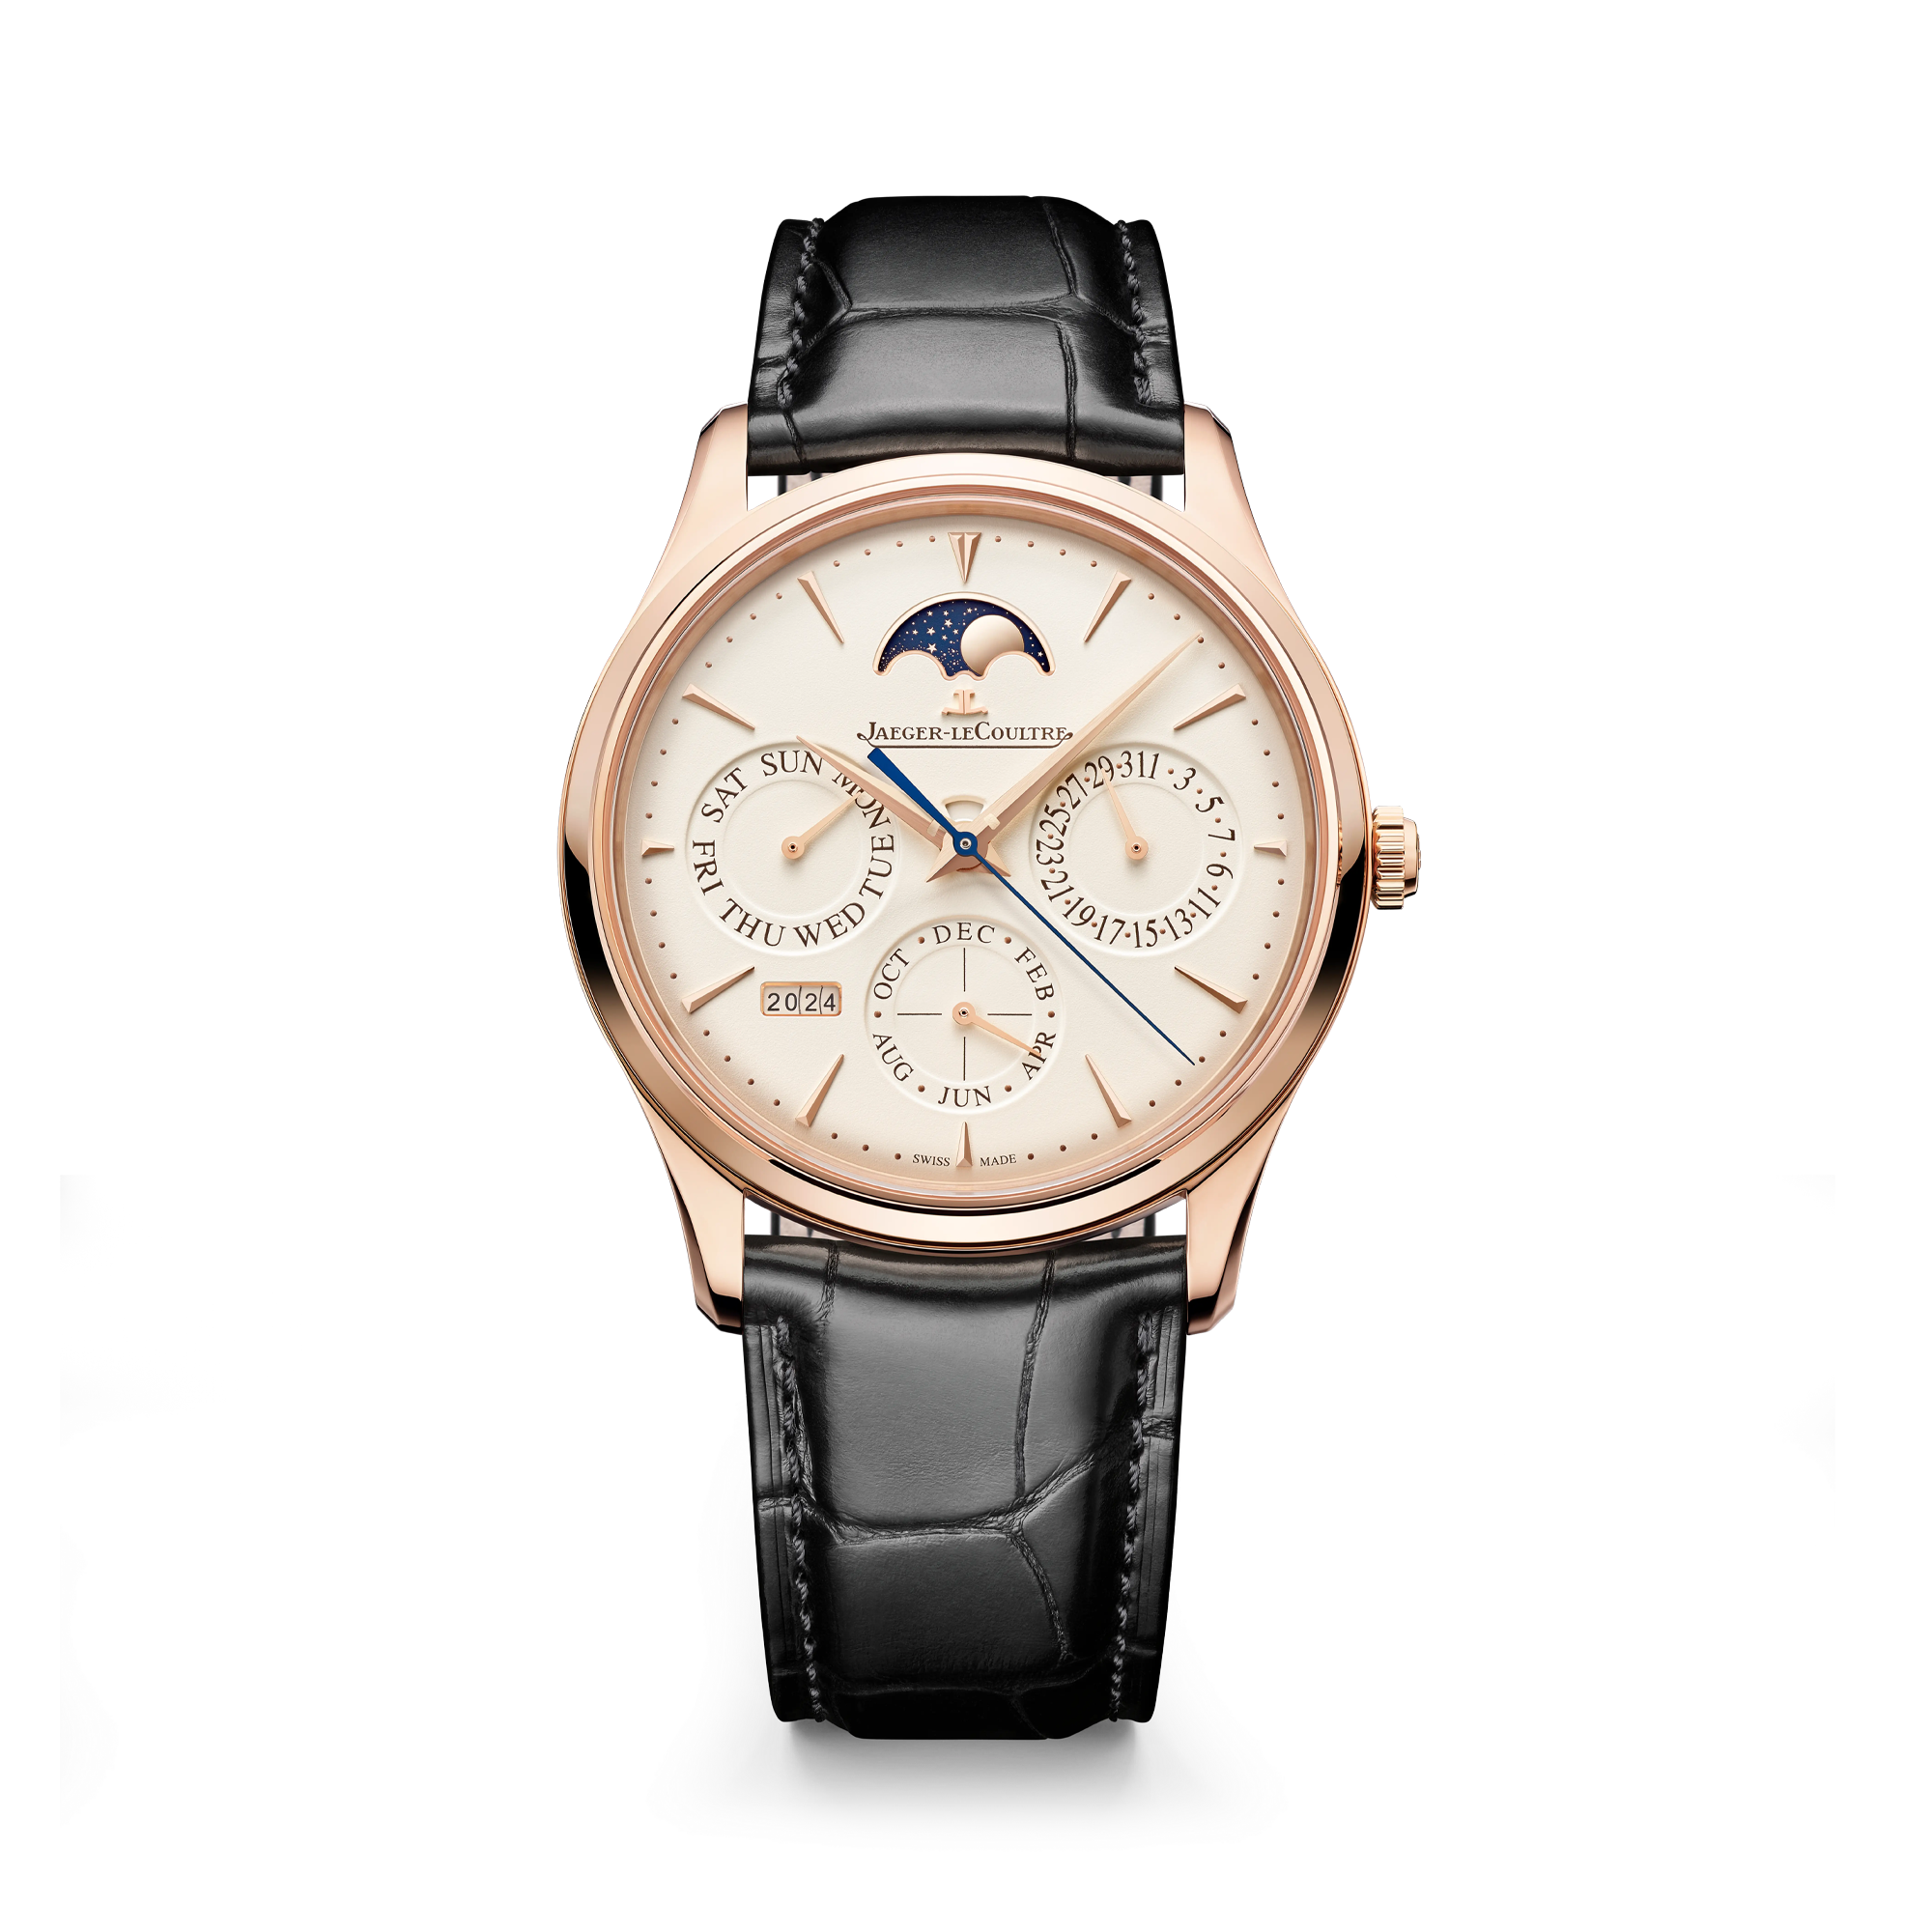 Jaeger-LeCoultre Master Ultra Thin 39mm, Beige Dial, Baton Numerals_1